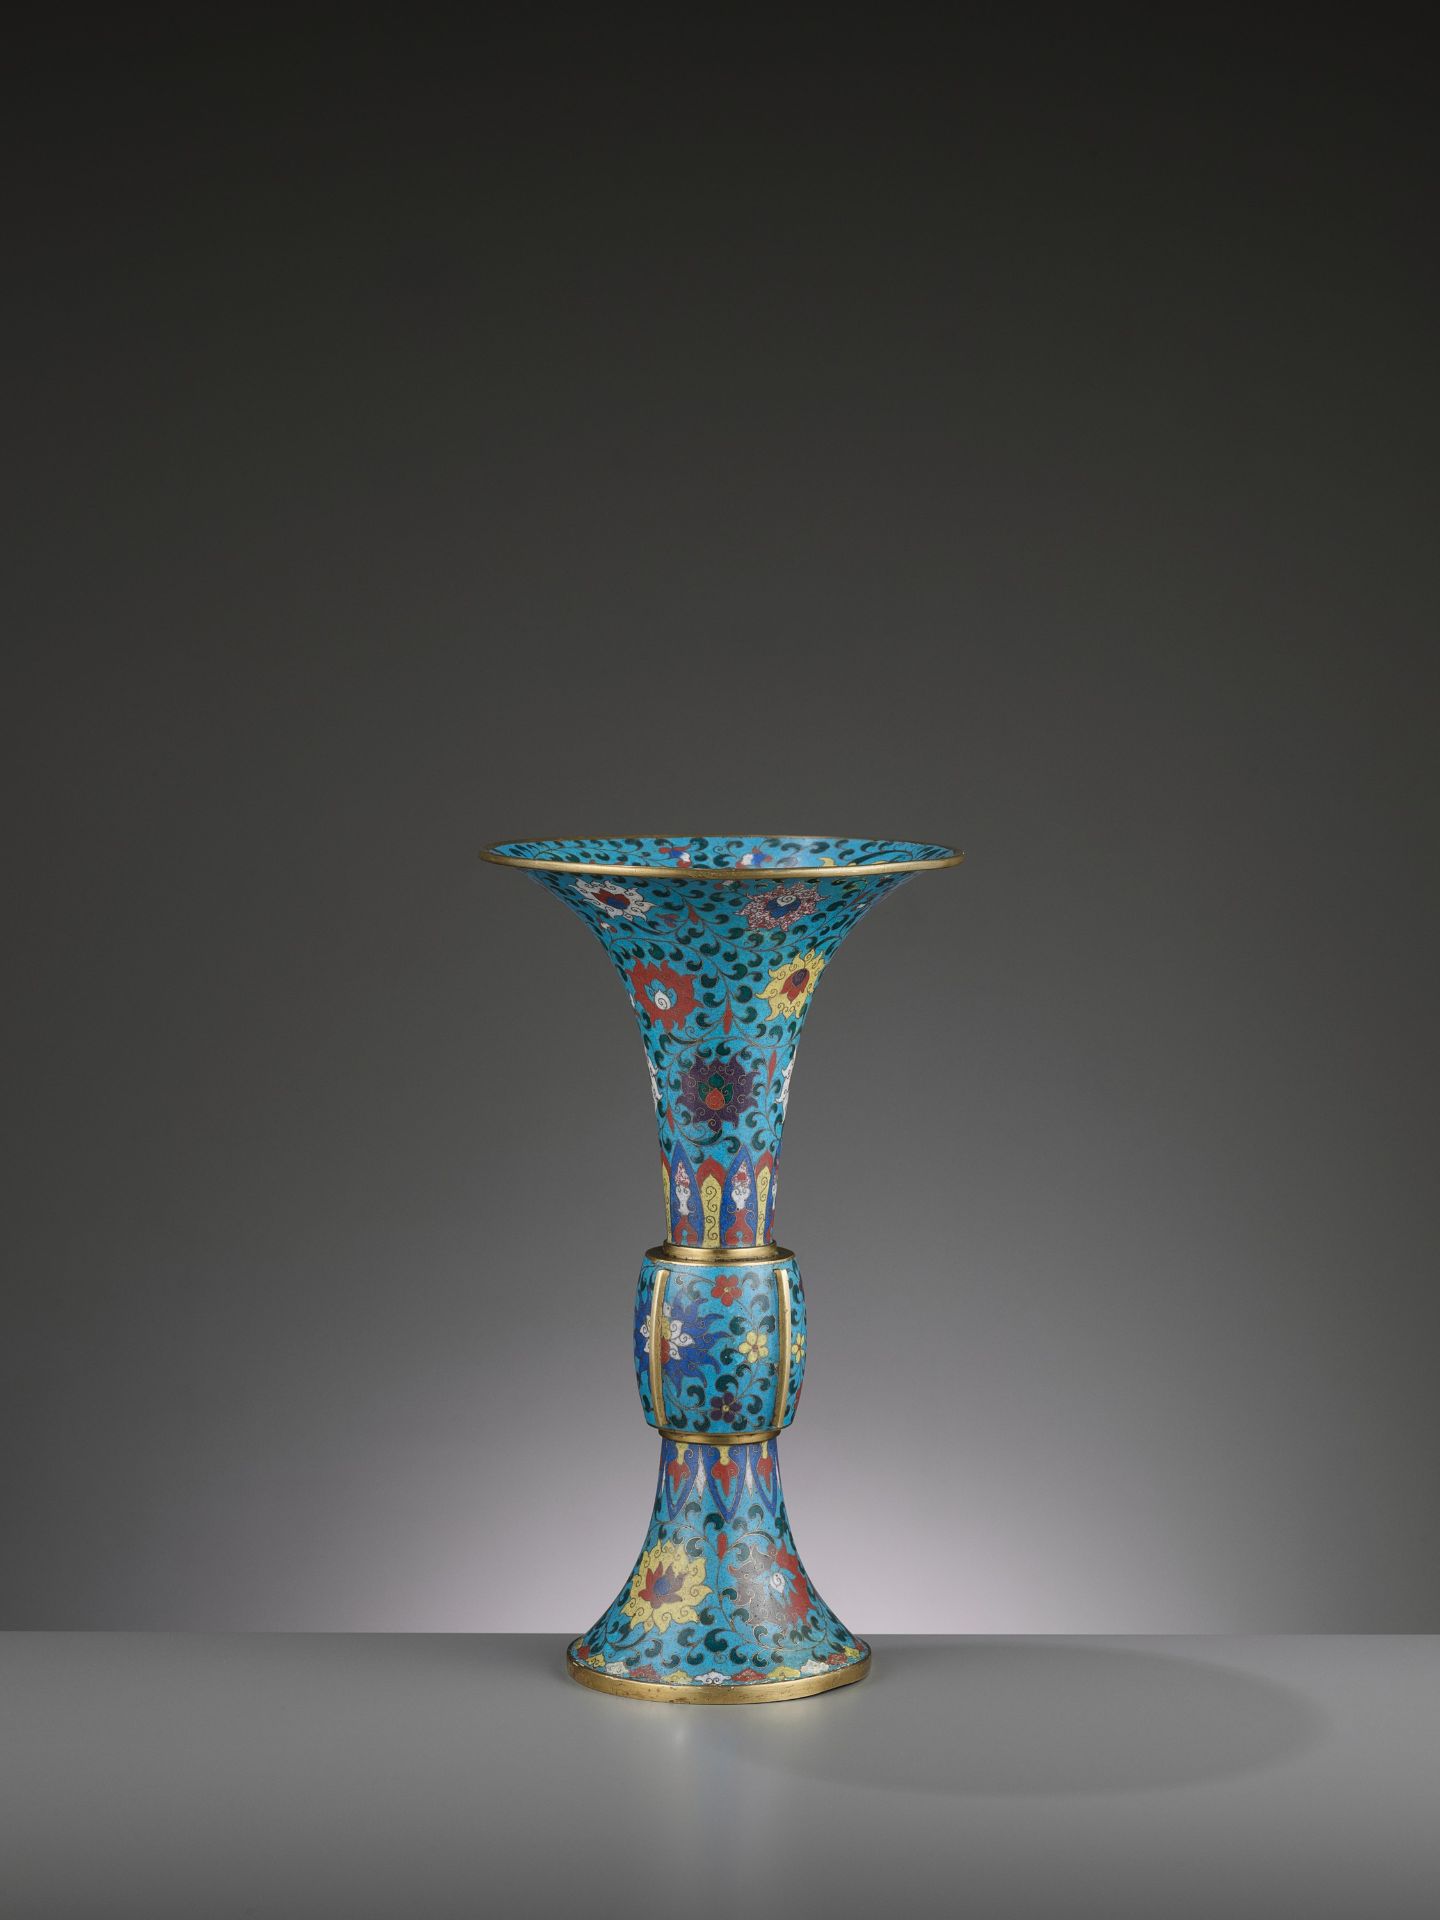 A LARGE CLOISONNE AND GILT-BRONZE GU, QING DYNASTY - Image 4 of 6